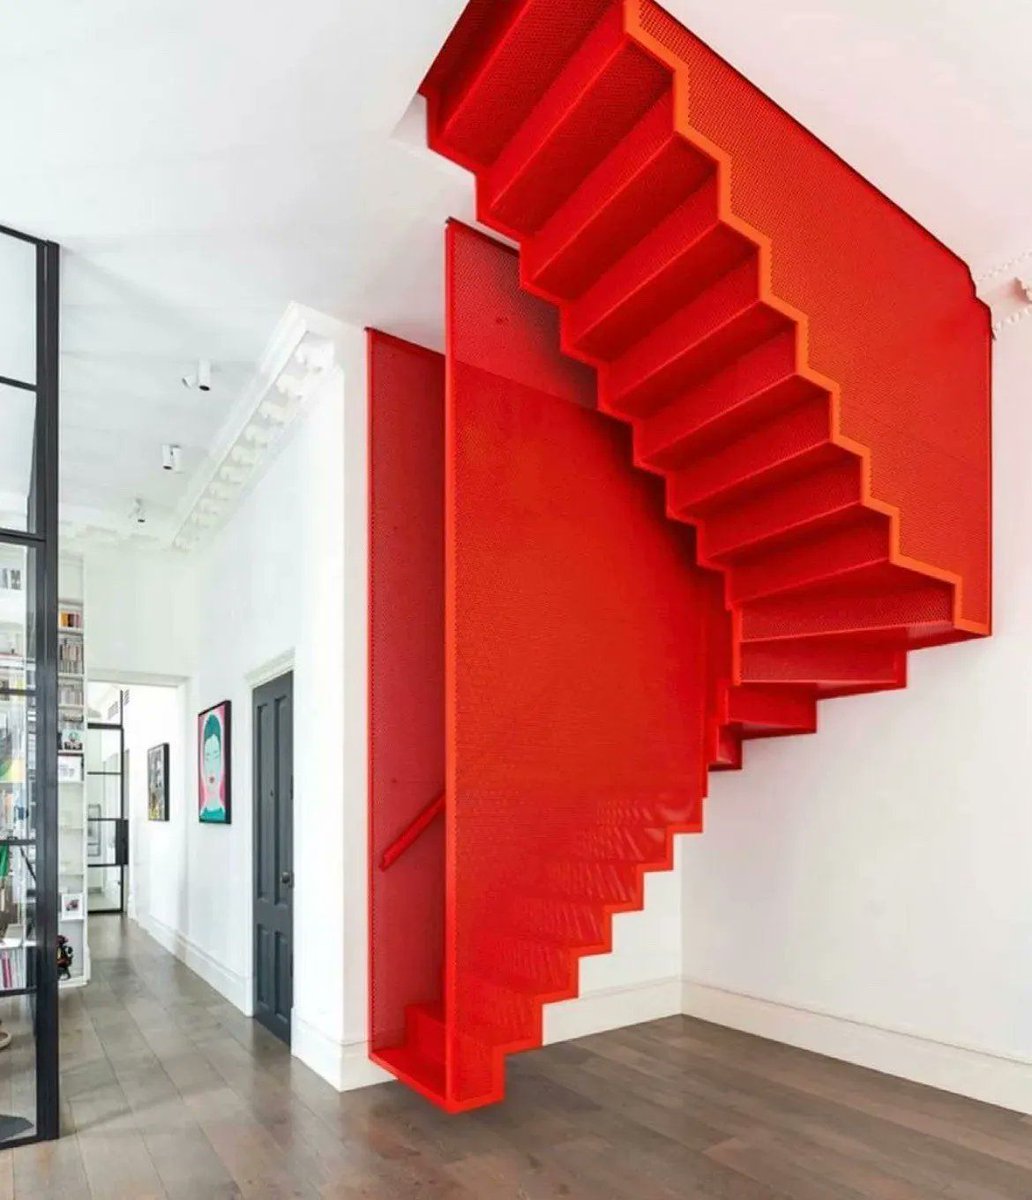 Incredible Floating Staircase 🪩 by Webb Yates #design #architecture #staircase #red